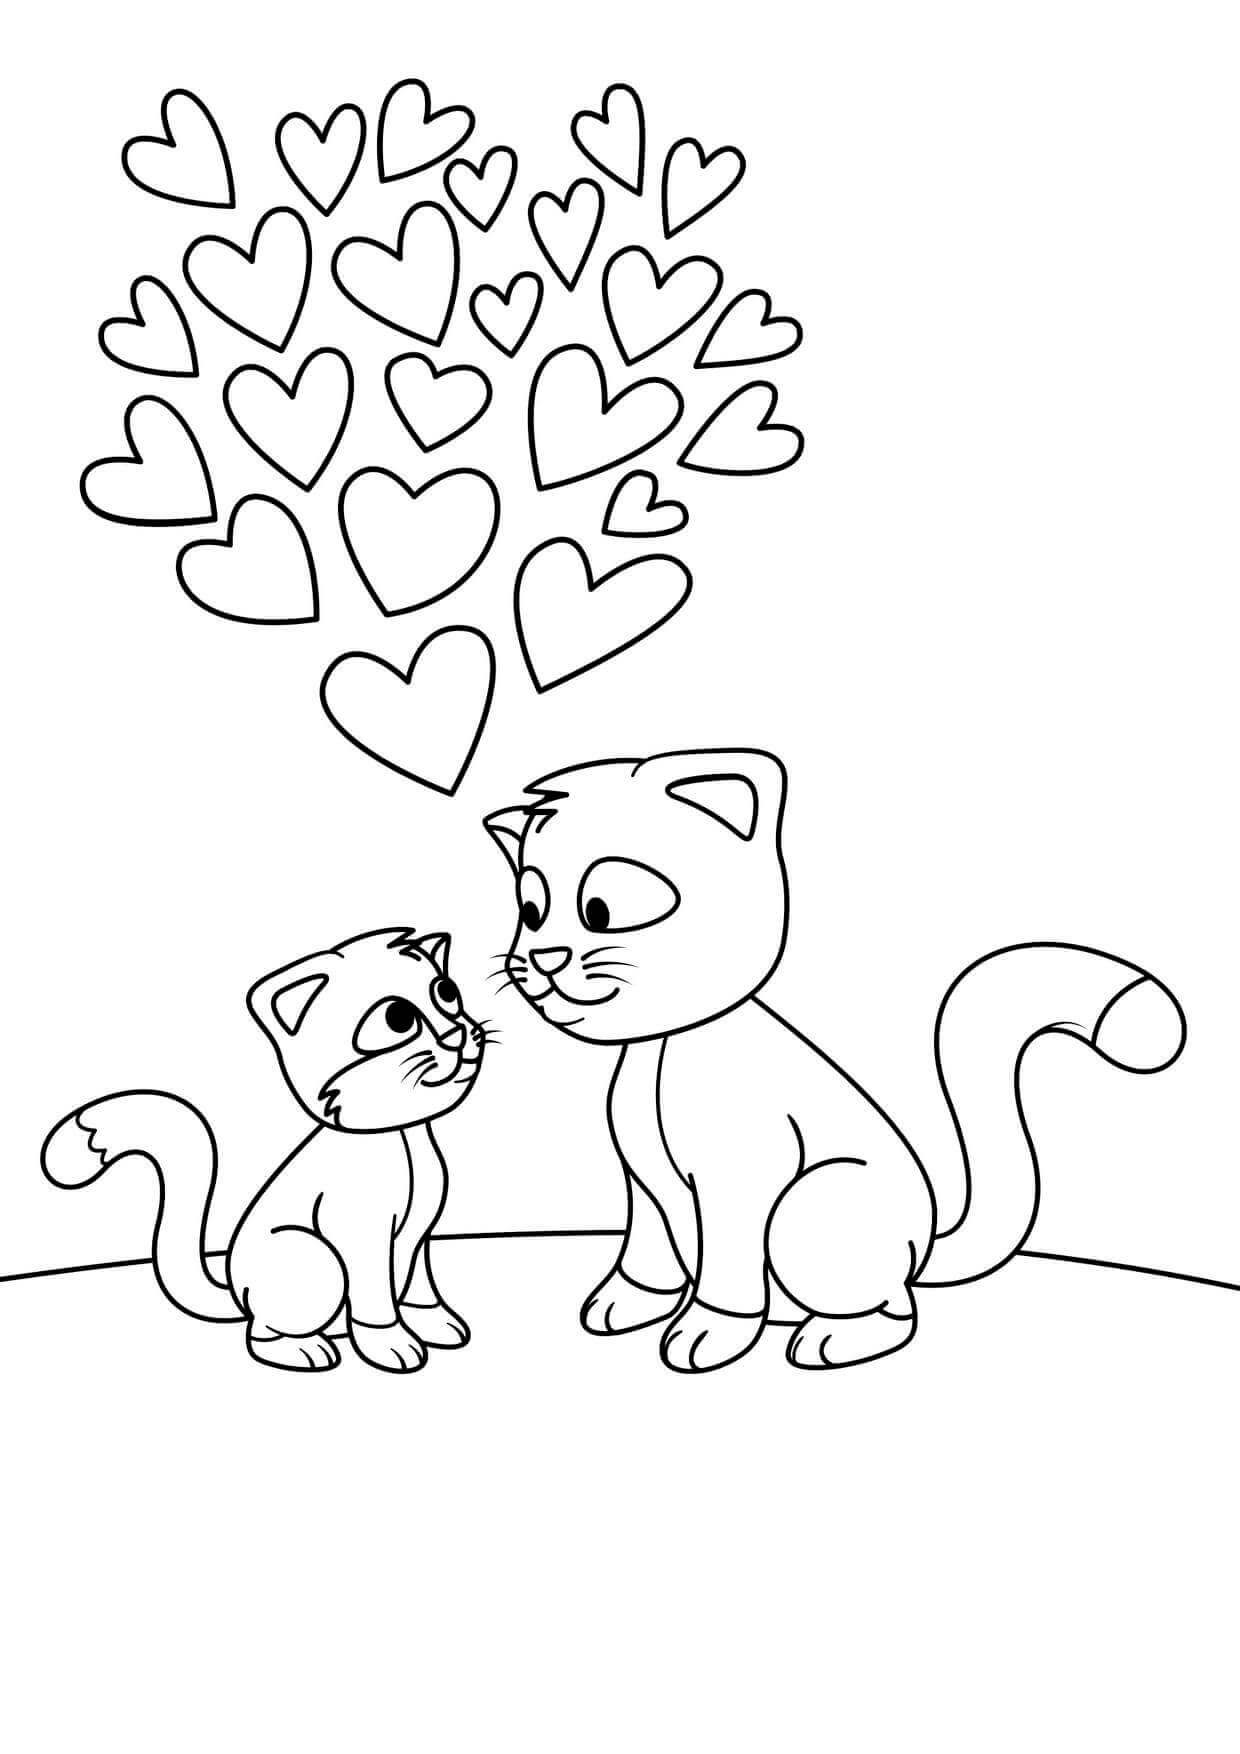 Coloring Sheets For Girls
 Free Printable Coloring Pages For Girls